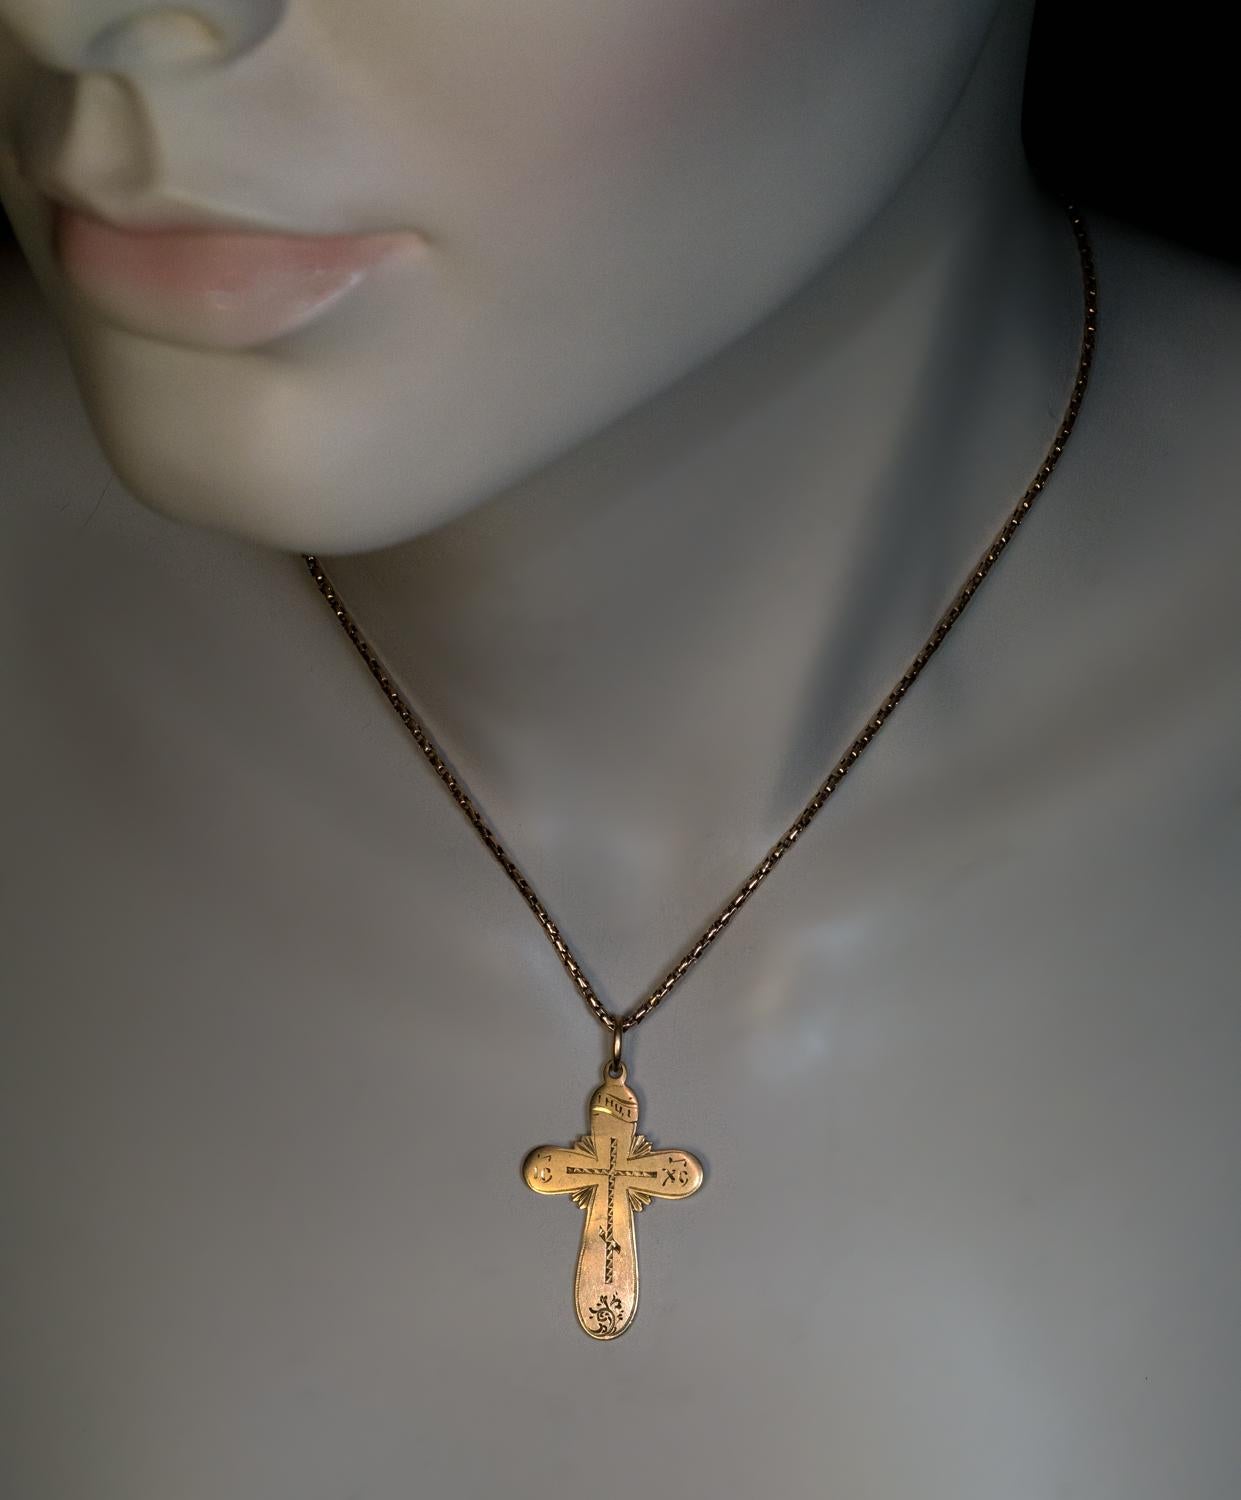 This antique Russian 14K yellow gold cross pendant with hand-engraved decorations was made in St. Petersburg in the 1880s – 1890s.
The abbreviation ‘IC’ – ‘XC’ on the horizontal arms of the cross stands for Jesus Christ.
The cross is marked on back